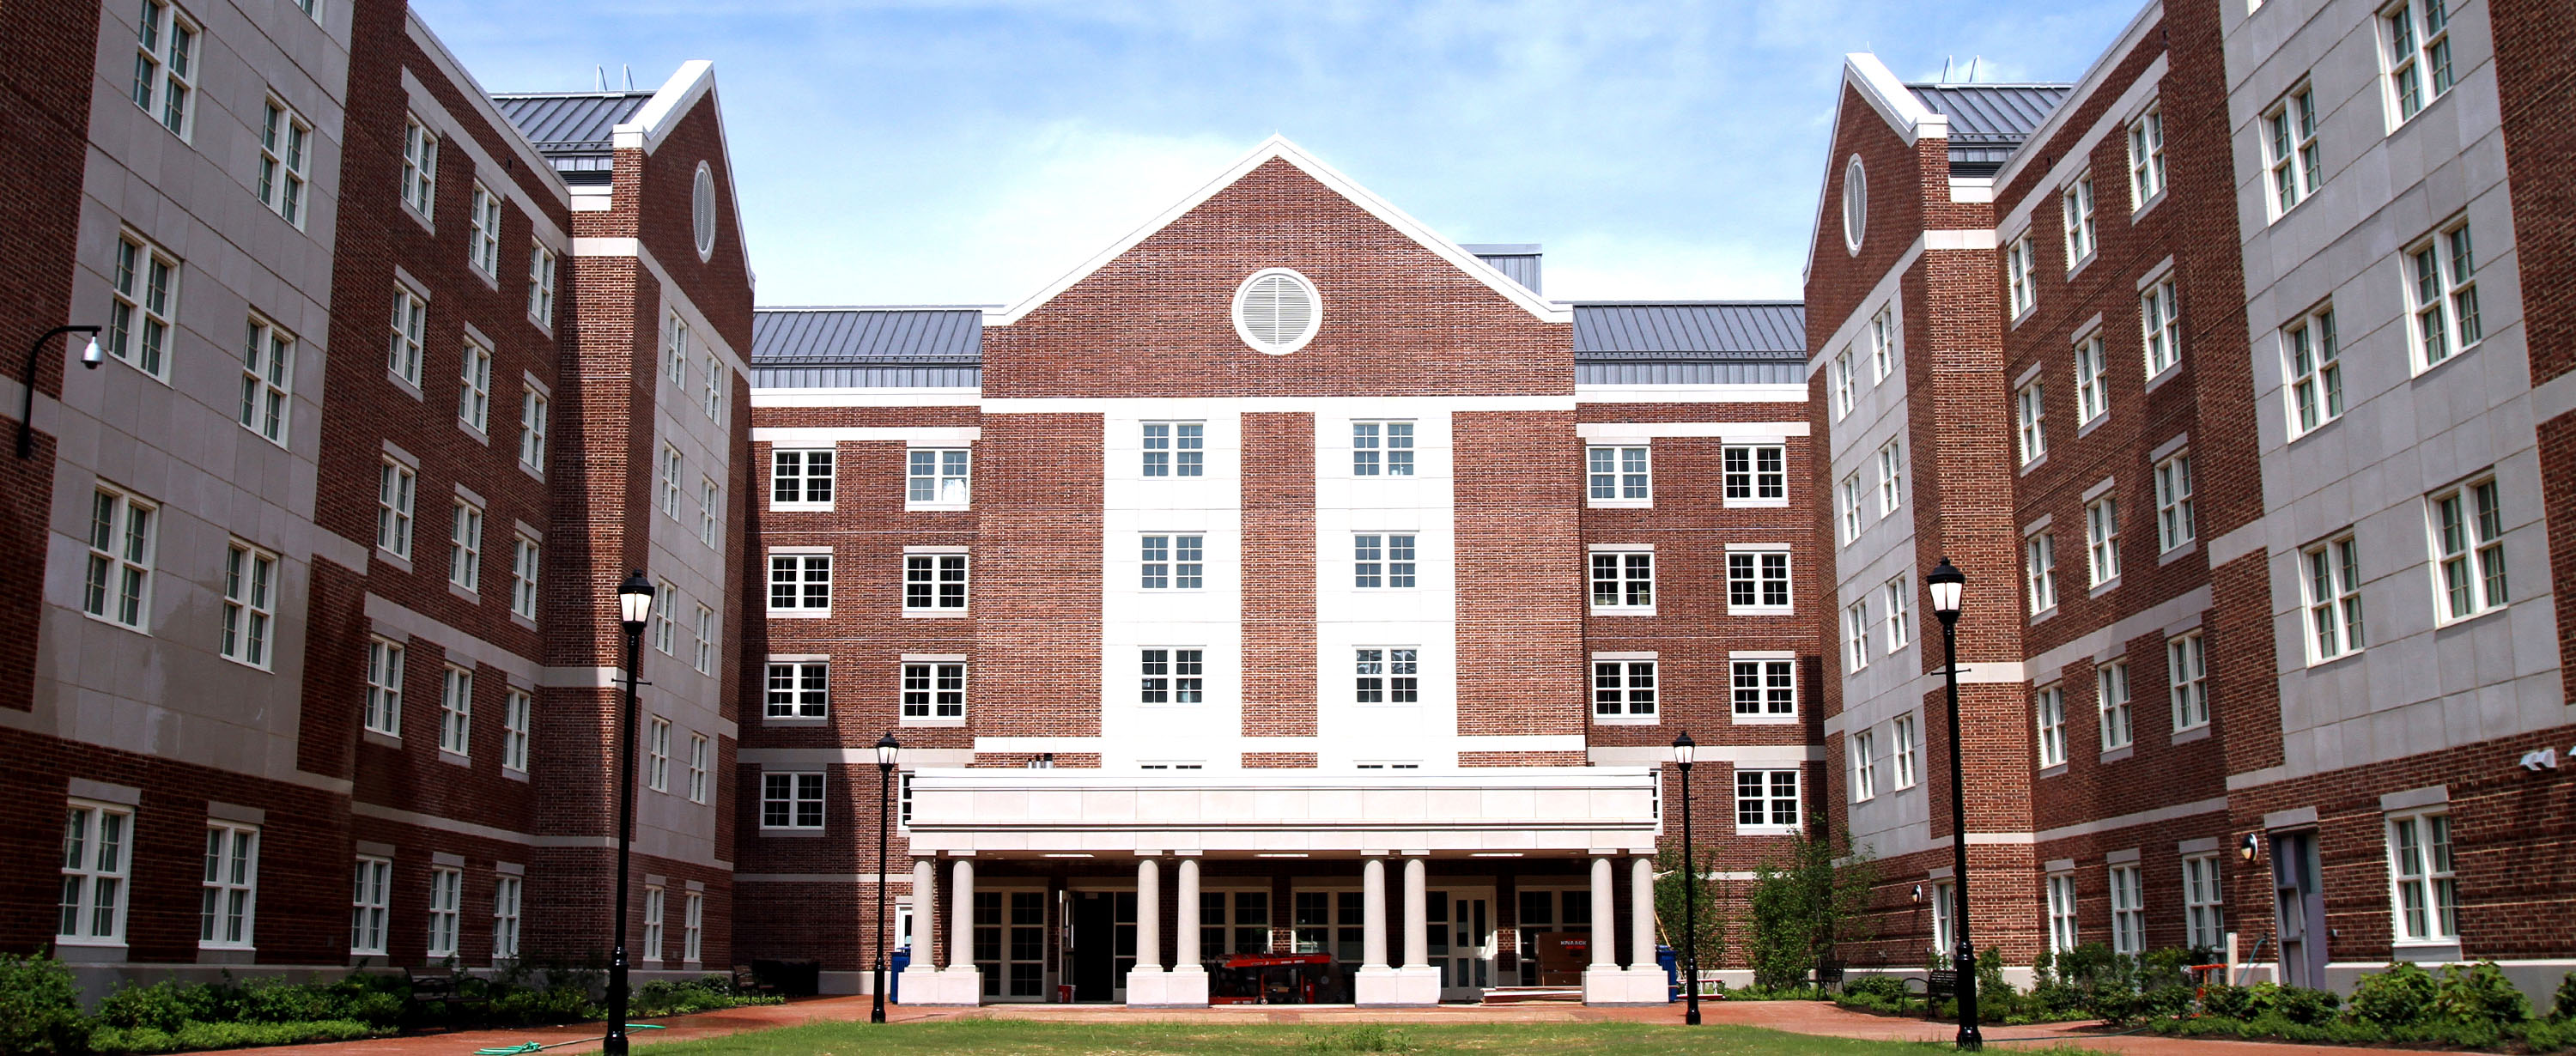 Exterior of Louis L. Redding residence hall